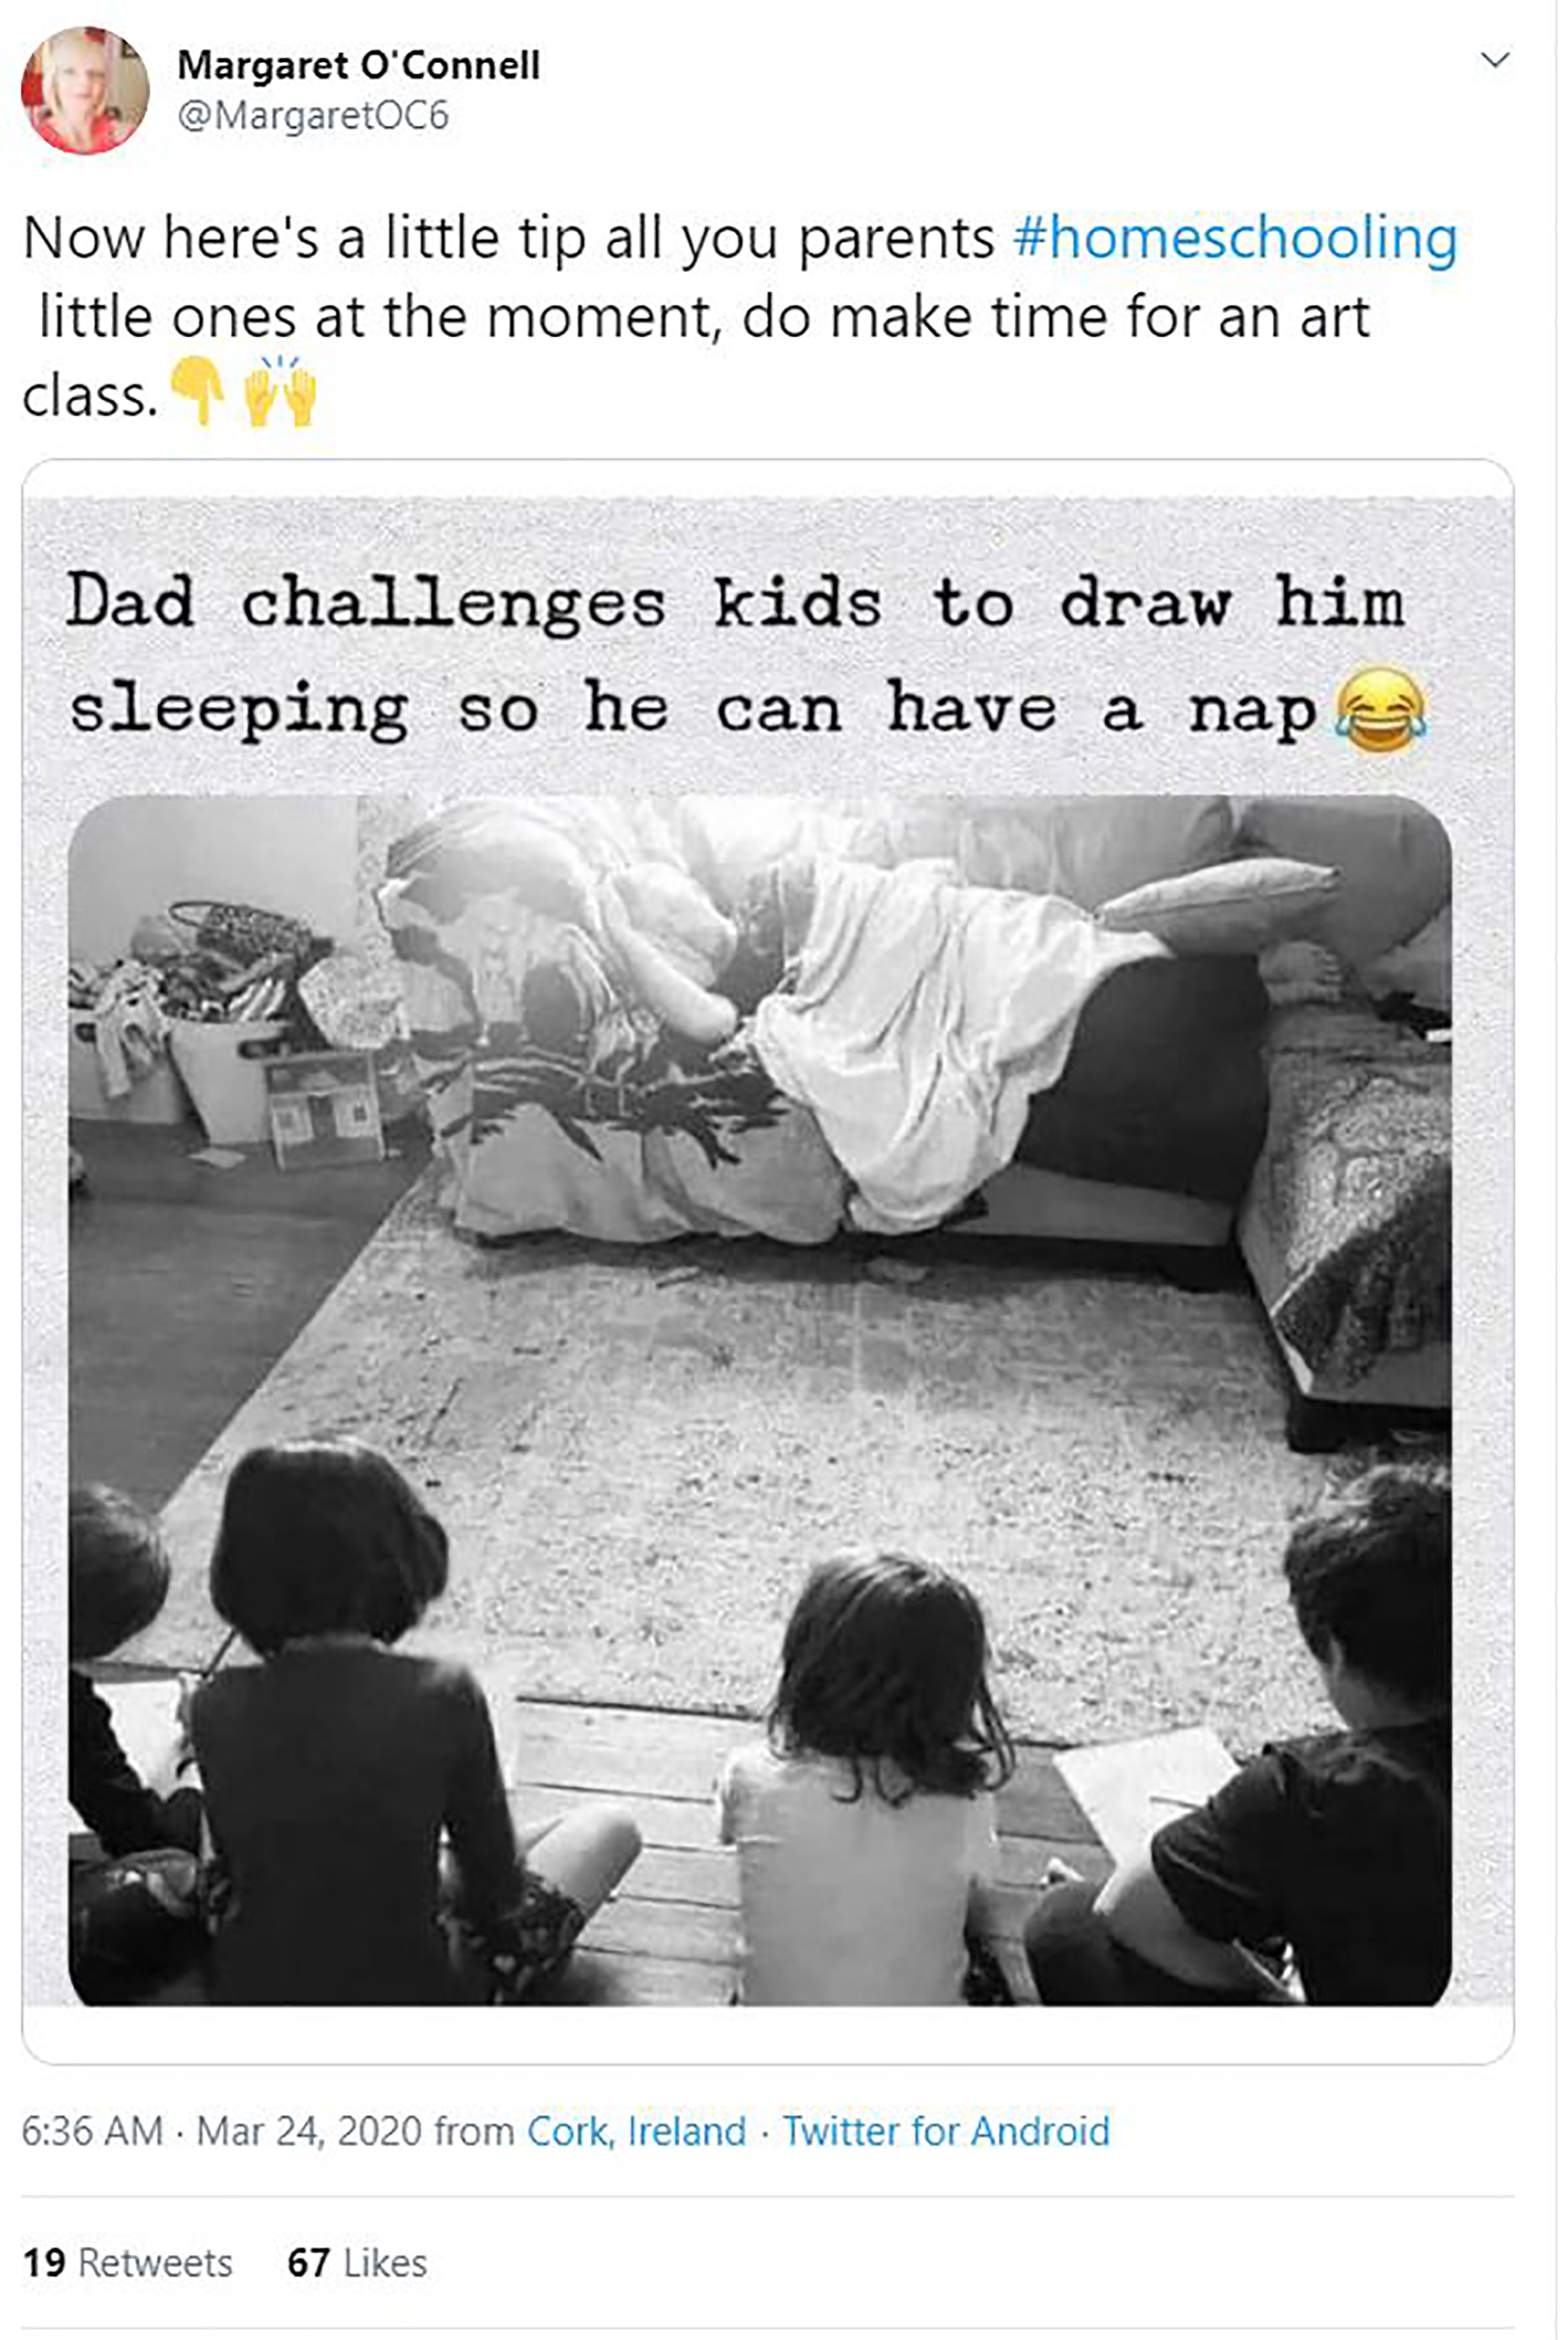 Work from home joke, says "Dad challenges kids to draw him sleeping so he can have a nap"